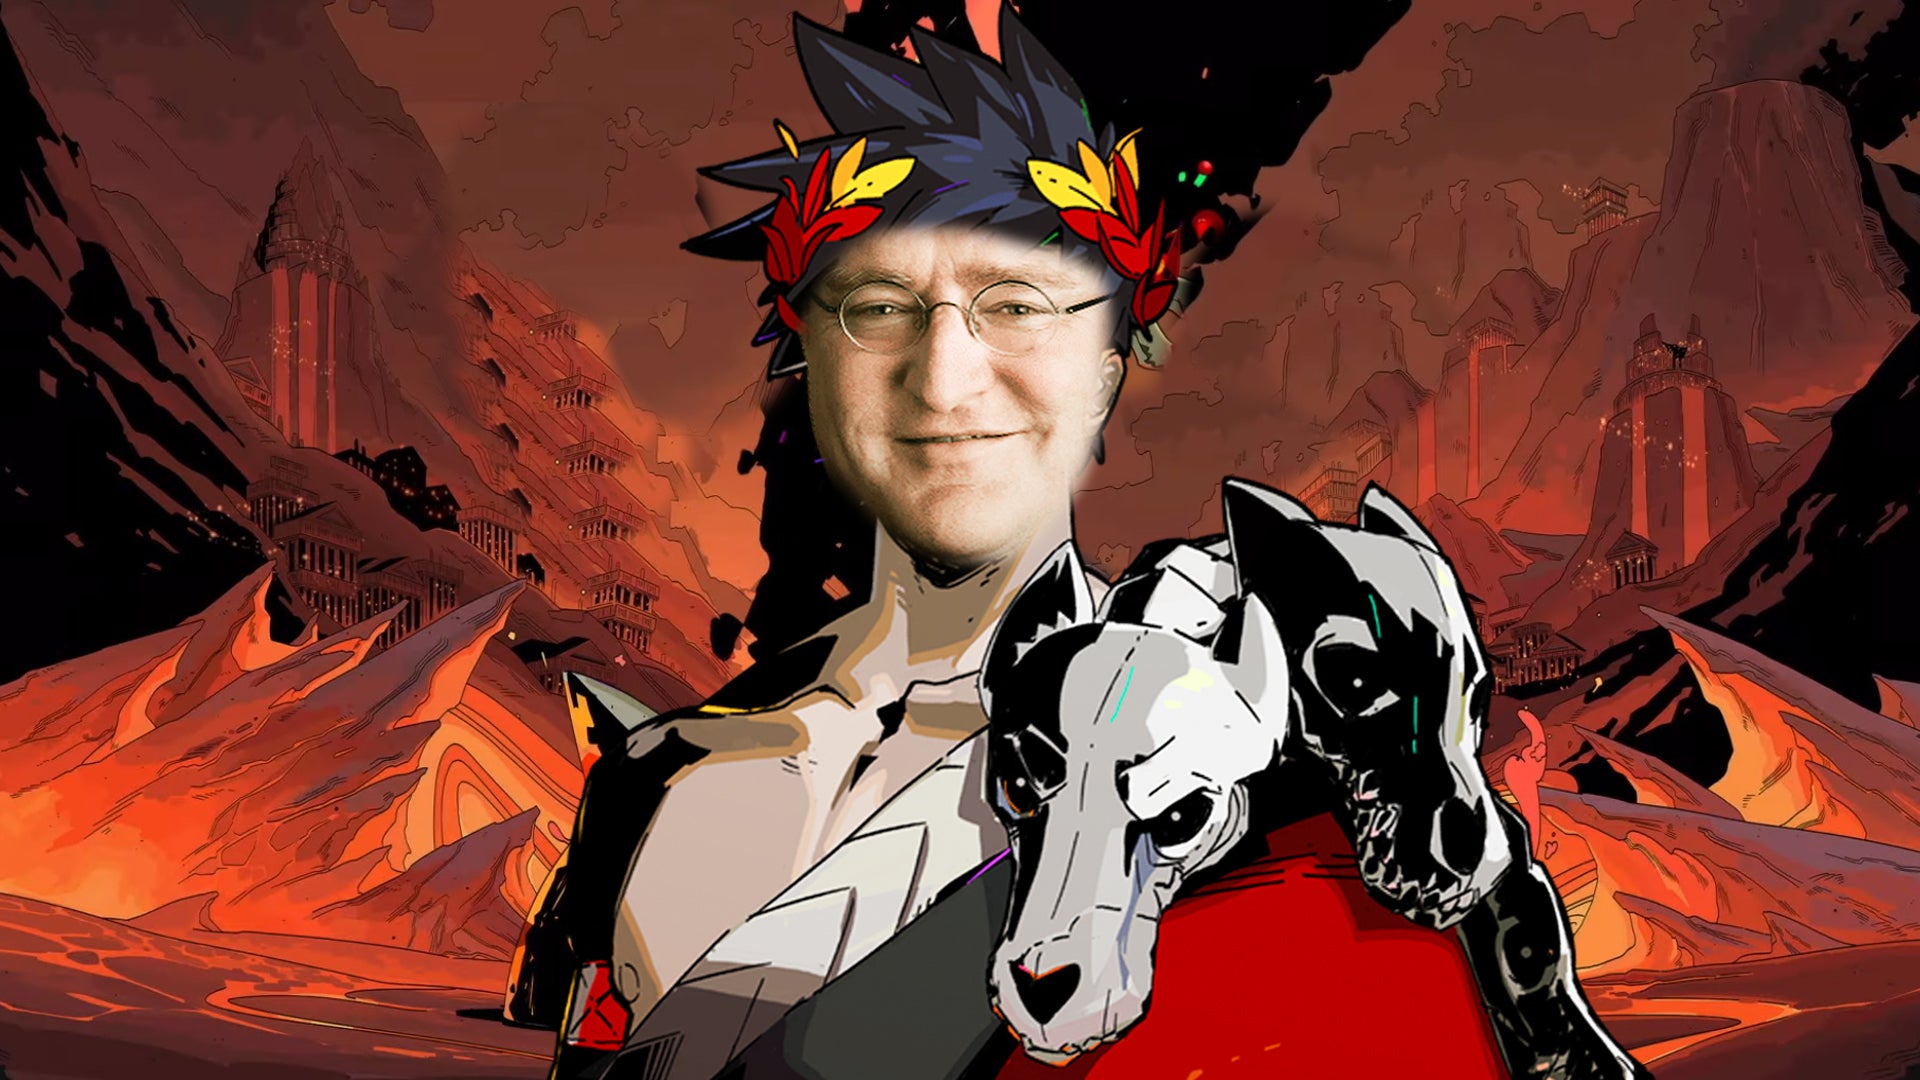 A head and shoulders shot of Zagreus from the video game Hades, but with the face of Gabe Newell